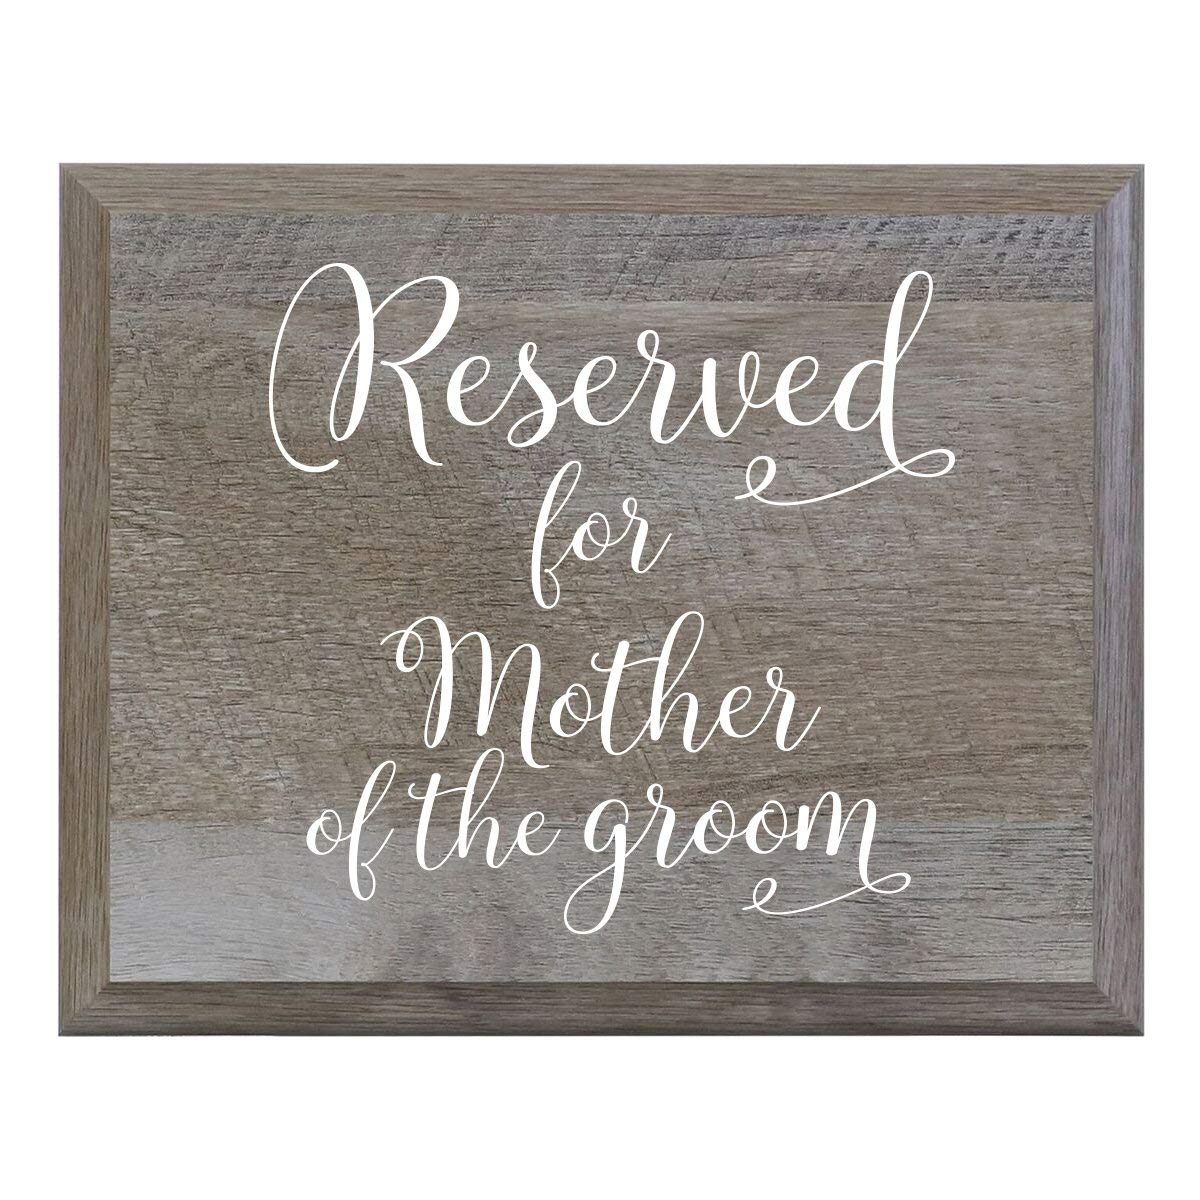 Reserved For Mother Of The Groom Decorative Wedding Party sign (6x8)